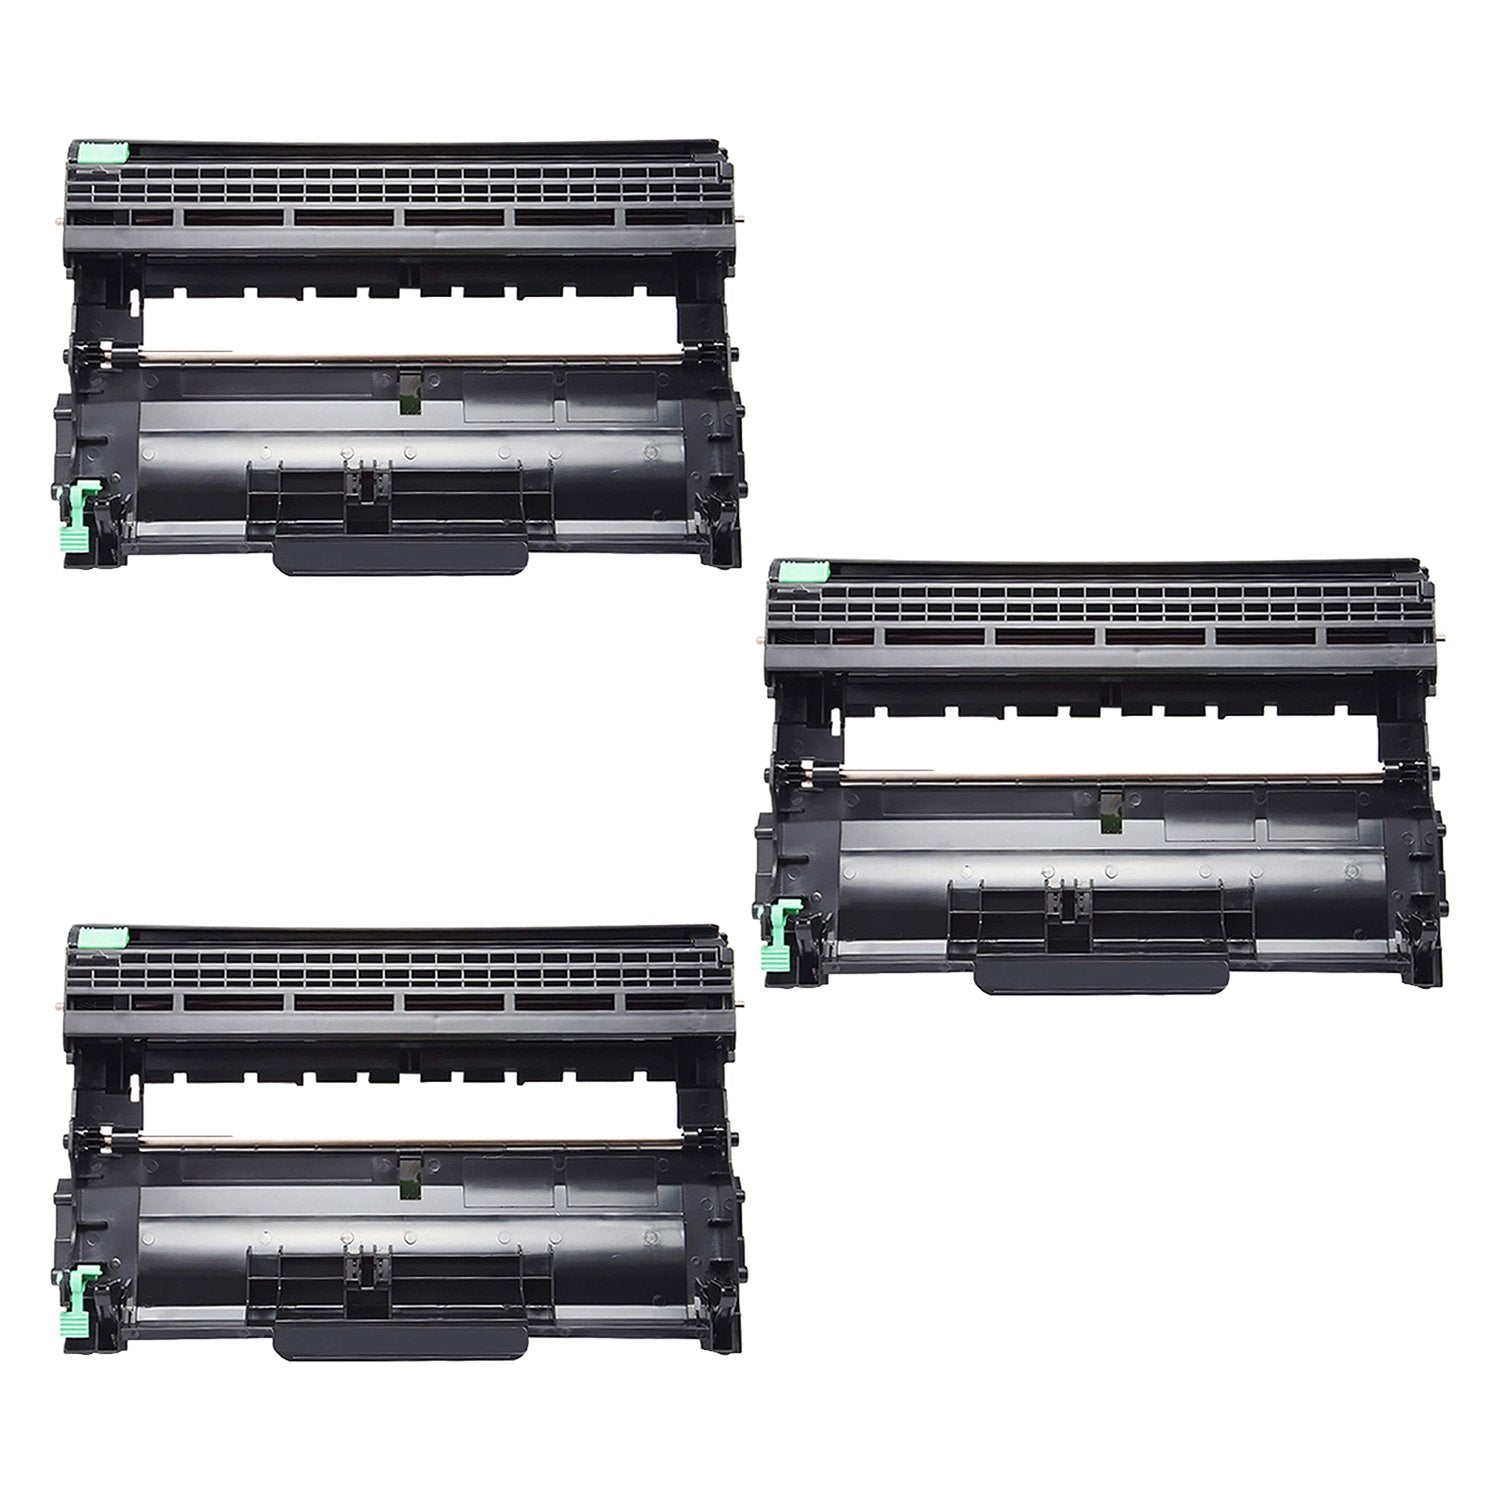 Absolute Toner Compatible Brother DR420 Black Drum Unit Toner Cartridge | Absolute Toner Brother Toner Cartridges